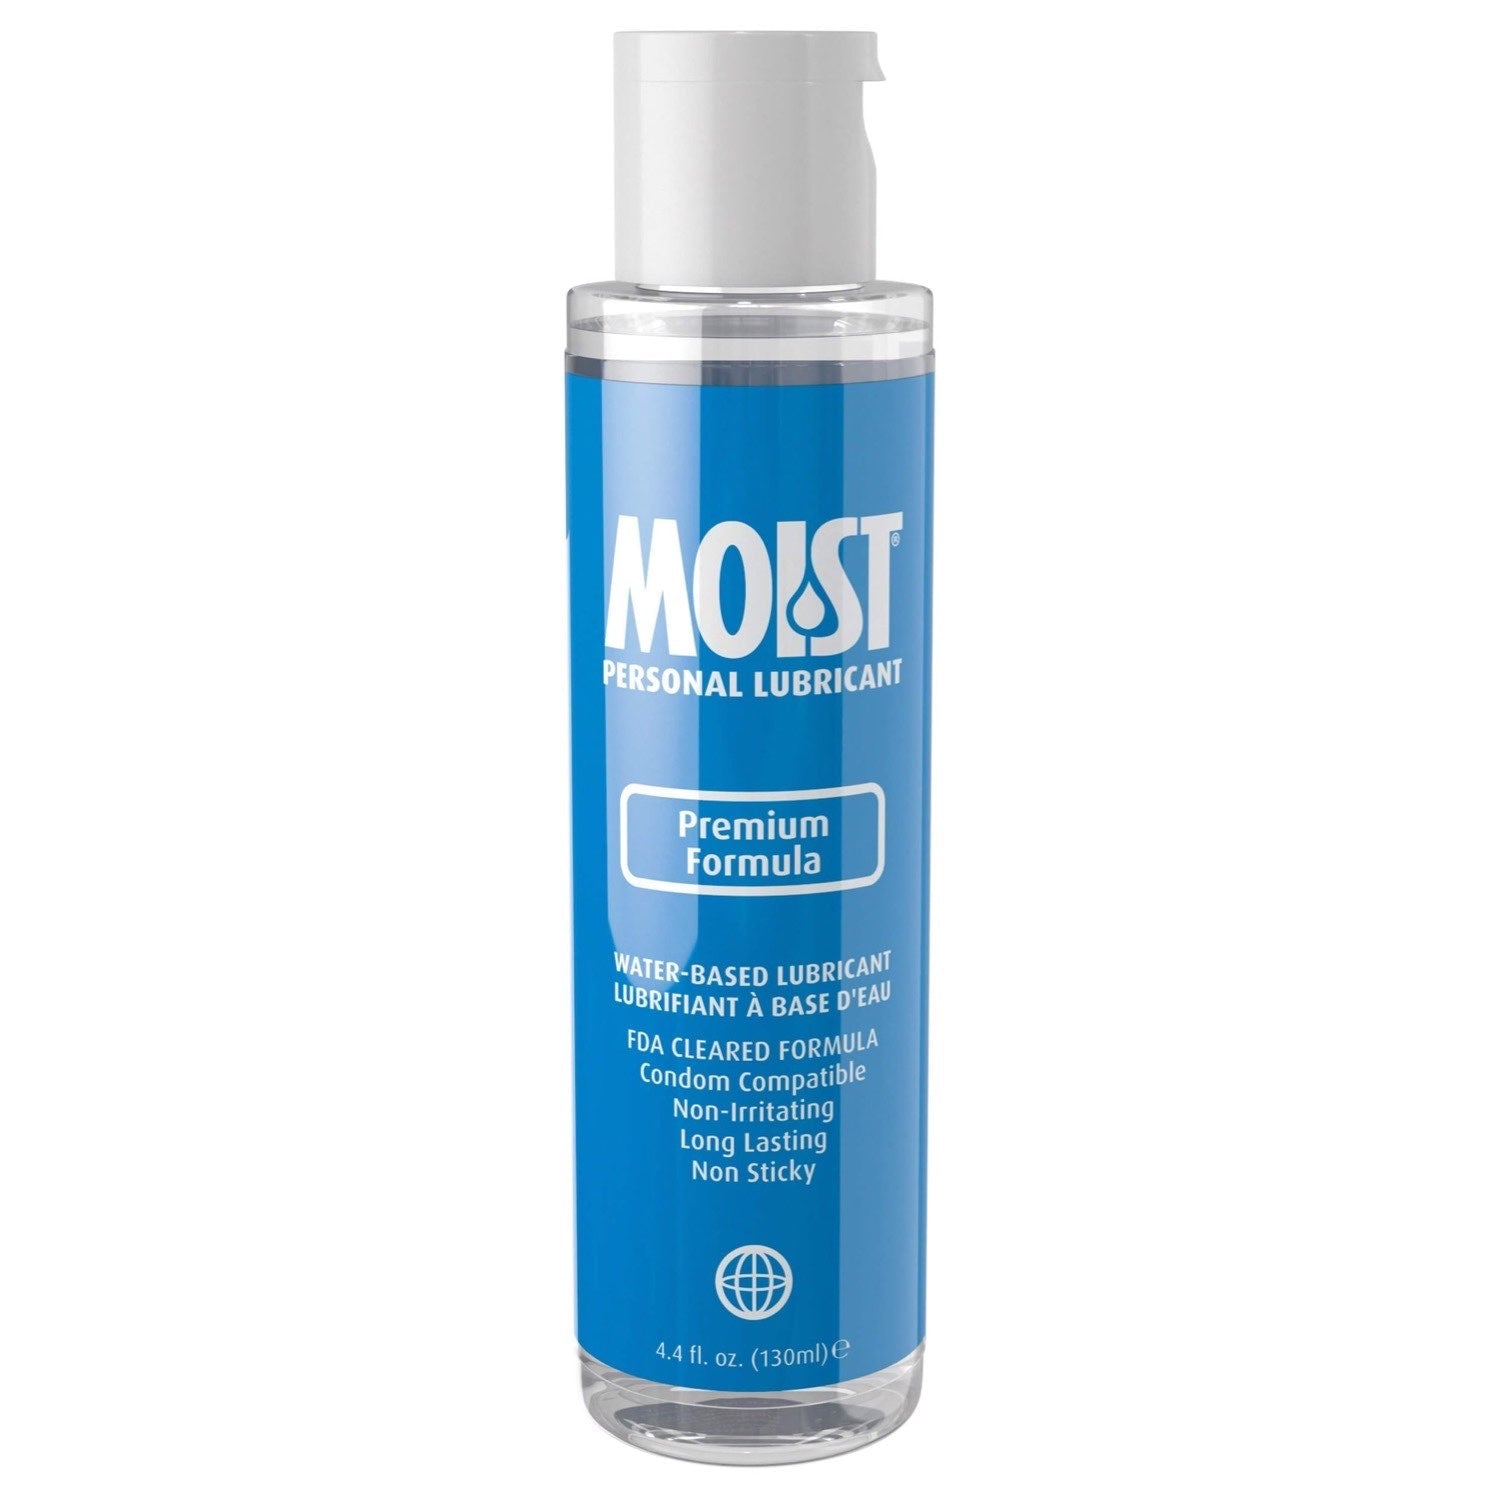  Moist Premium Formula - Water Based Lubricant - 130 ml Bottle by Pipedream